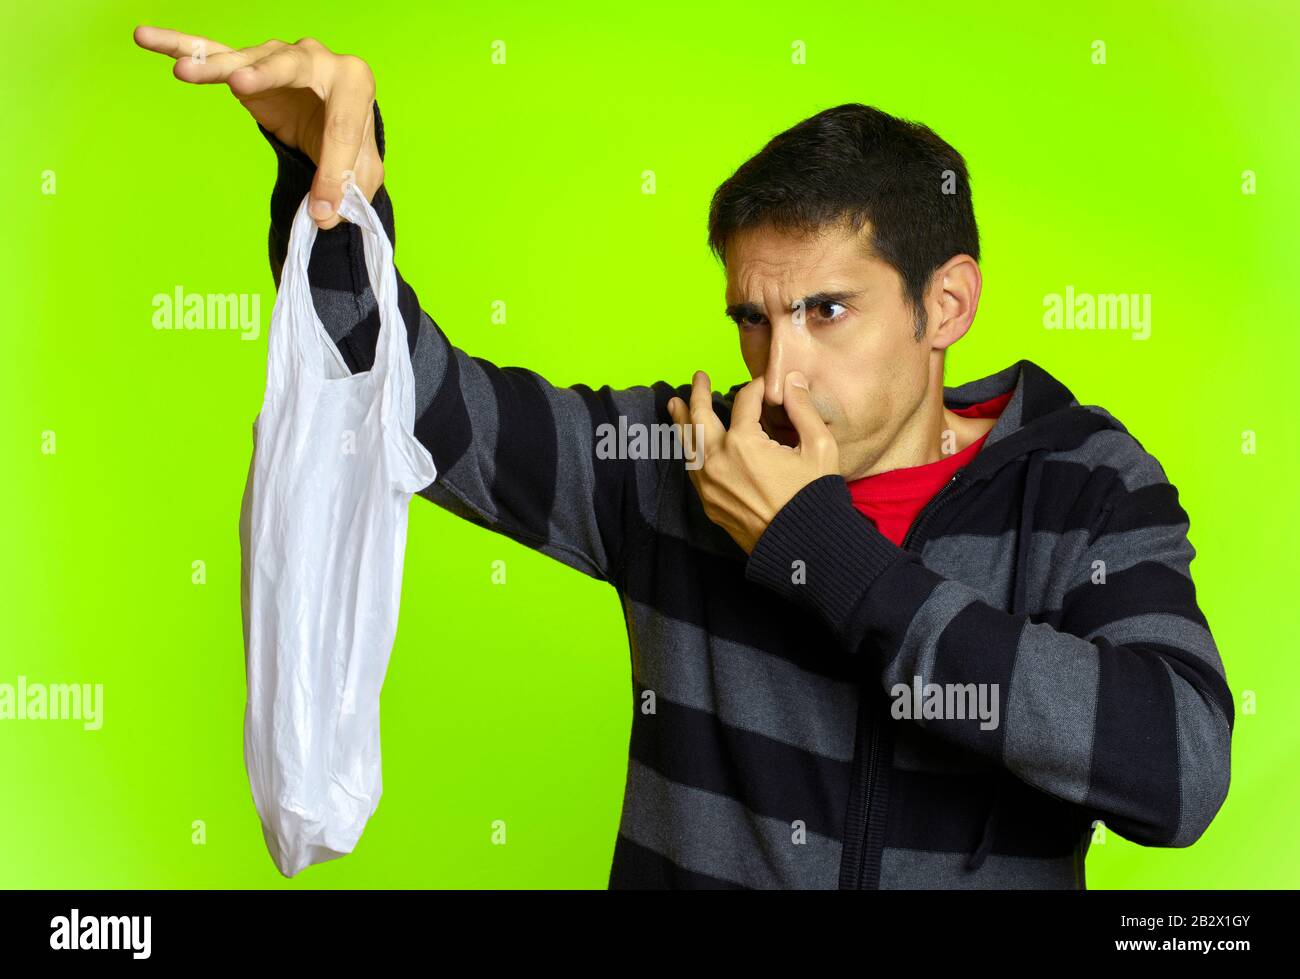 A man covering his nose with disgust holds a plastic bag in front of a green background Stock Photo